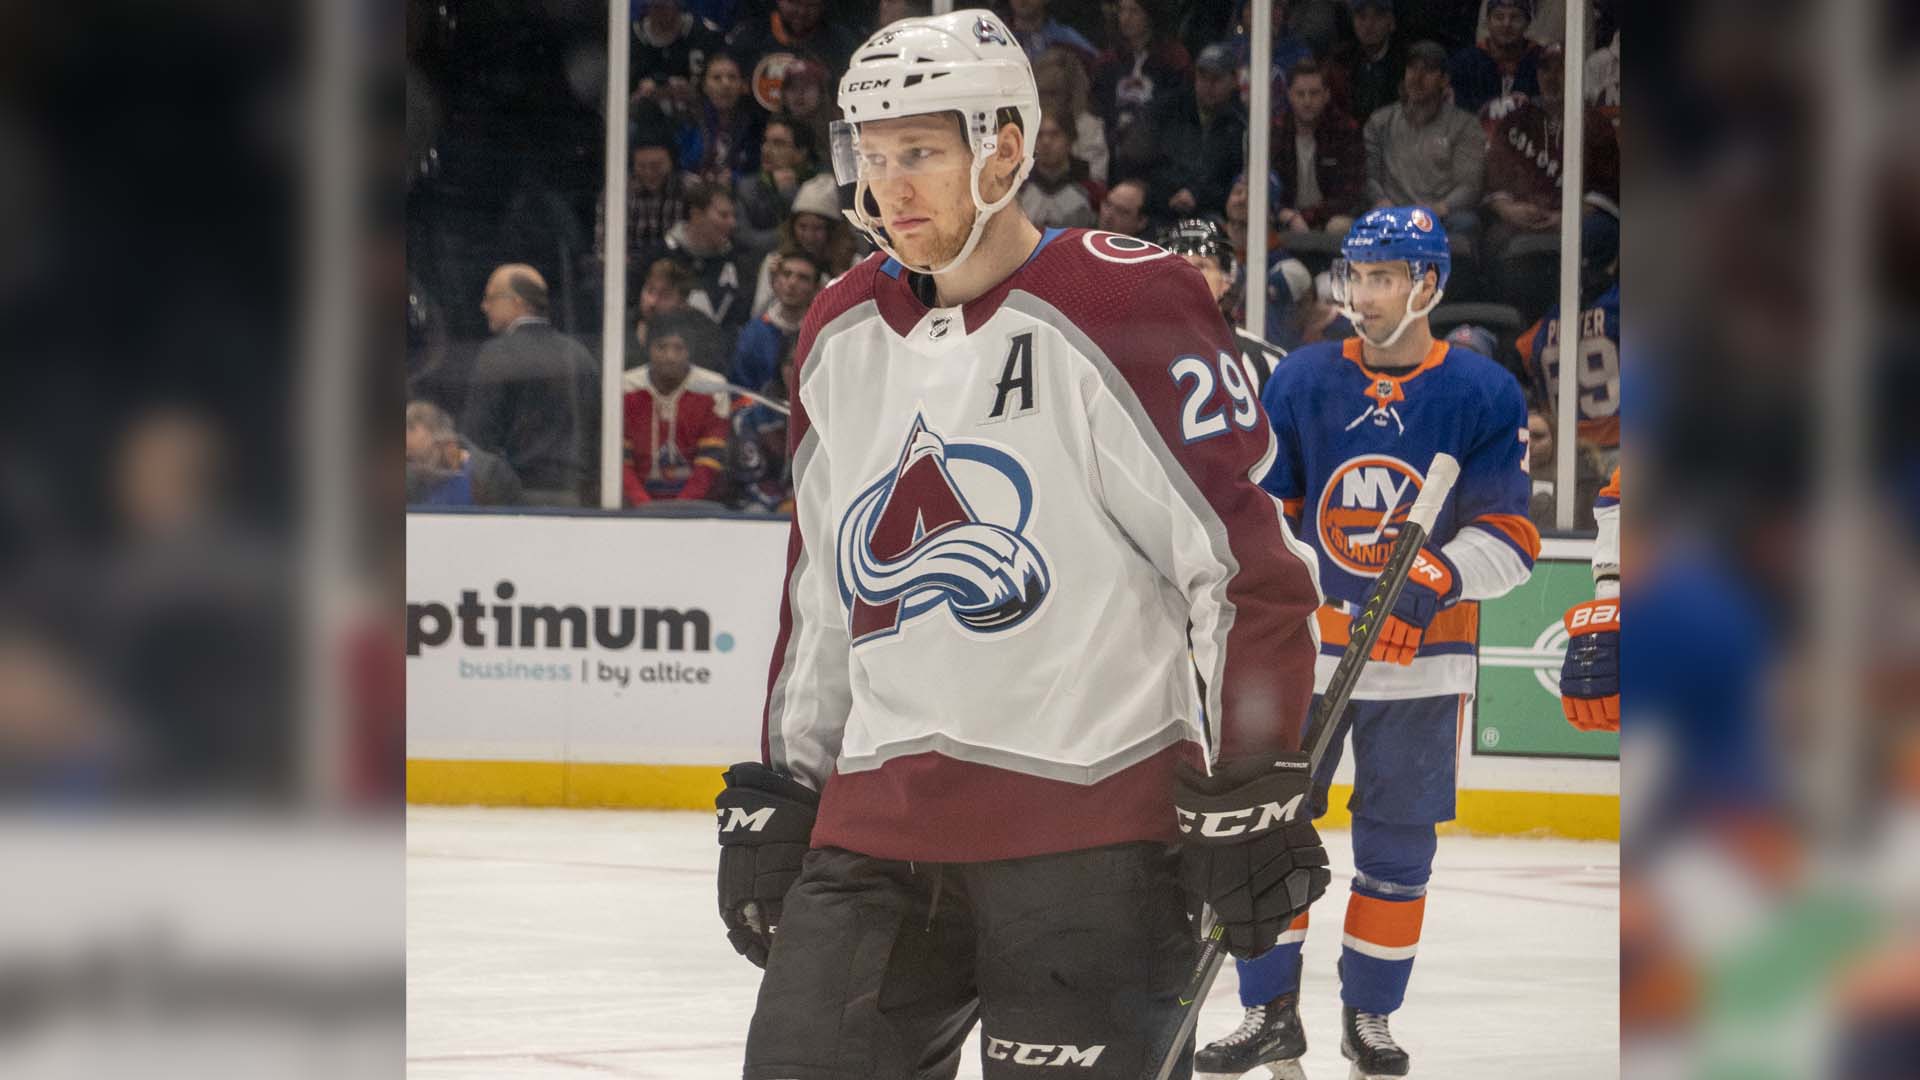 Sports News Roundup: Nathan MacKinnon rallies Avs past Stars in overtime; Red Wings outlast Kings in shootout and more 